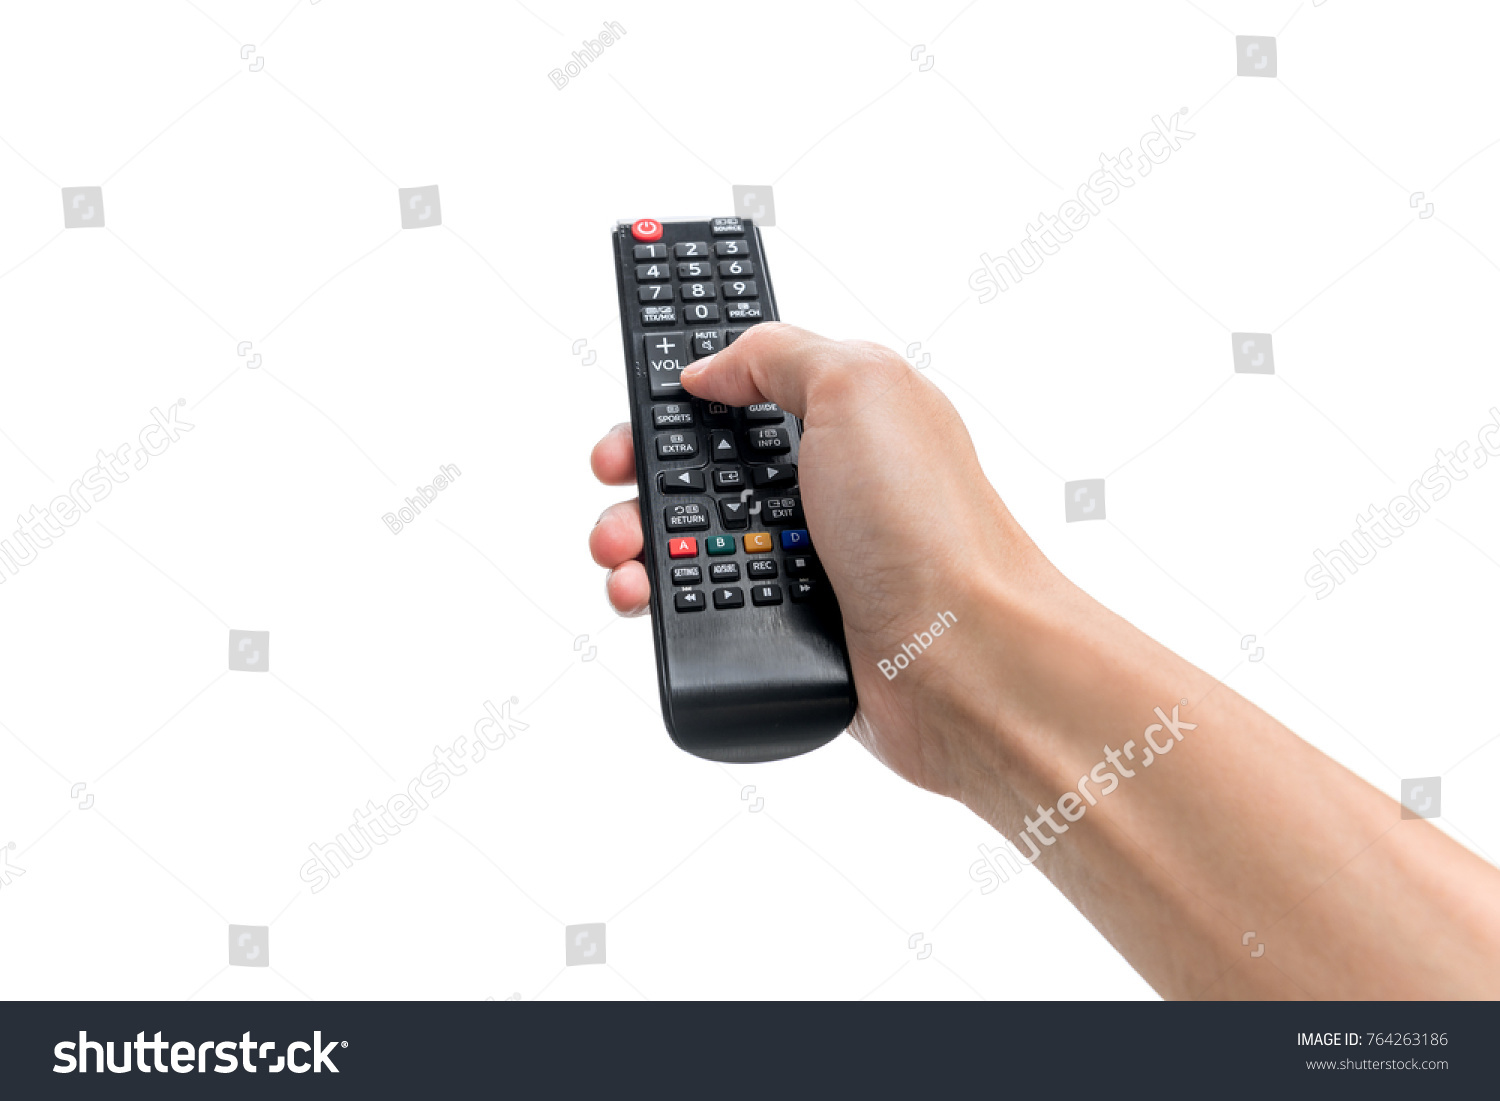 Hand pressing remote control isolated on white background #764263186